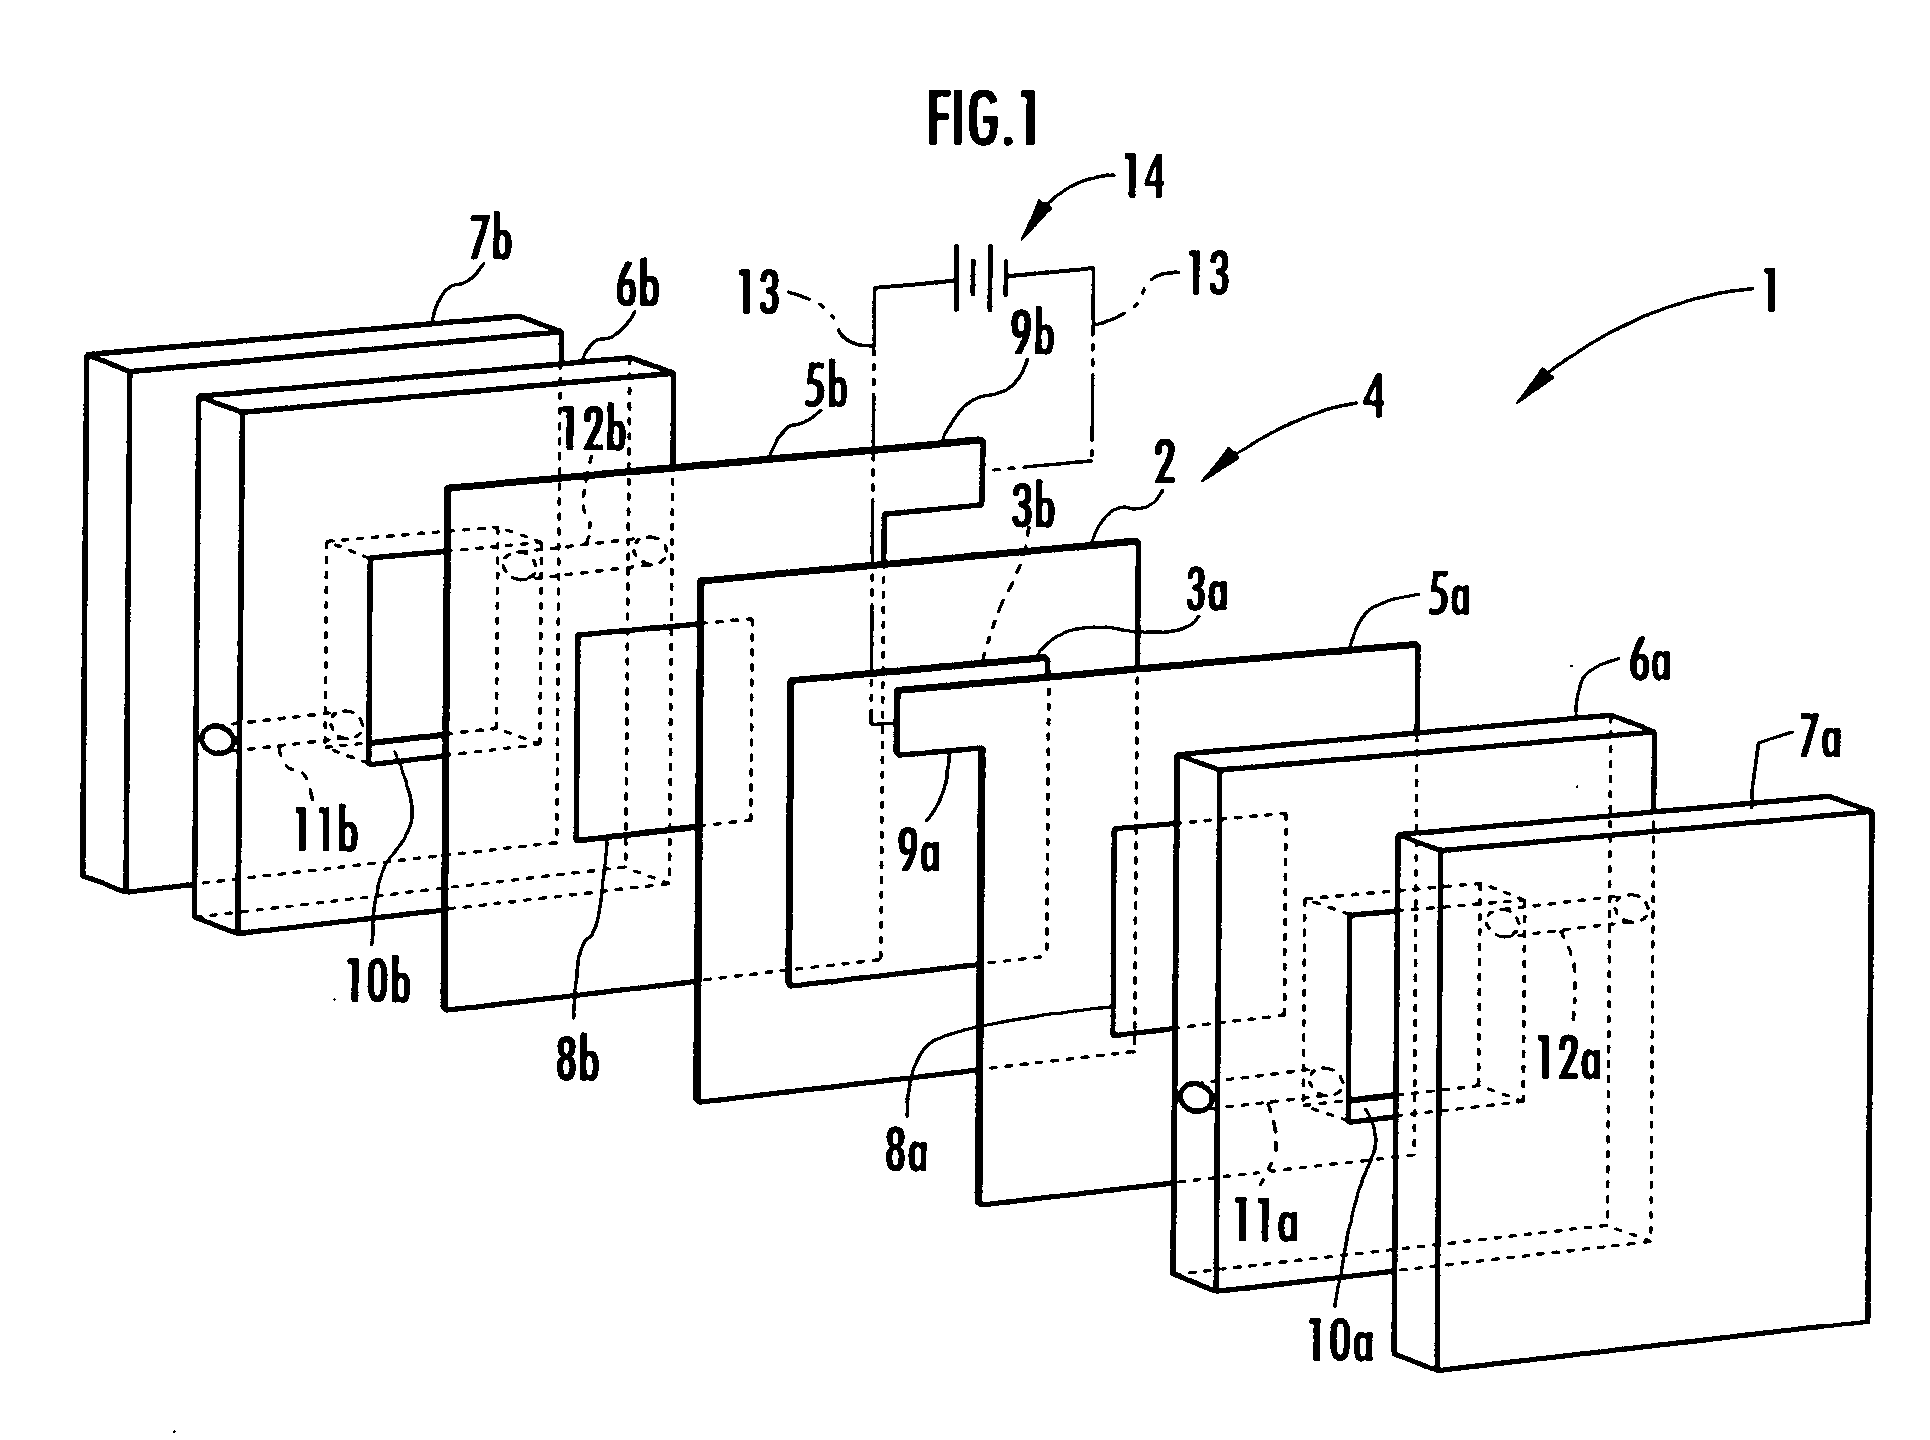 Electrolysis vessel and apparatus for generating electrolyzed water